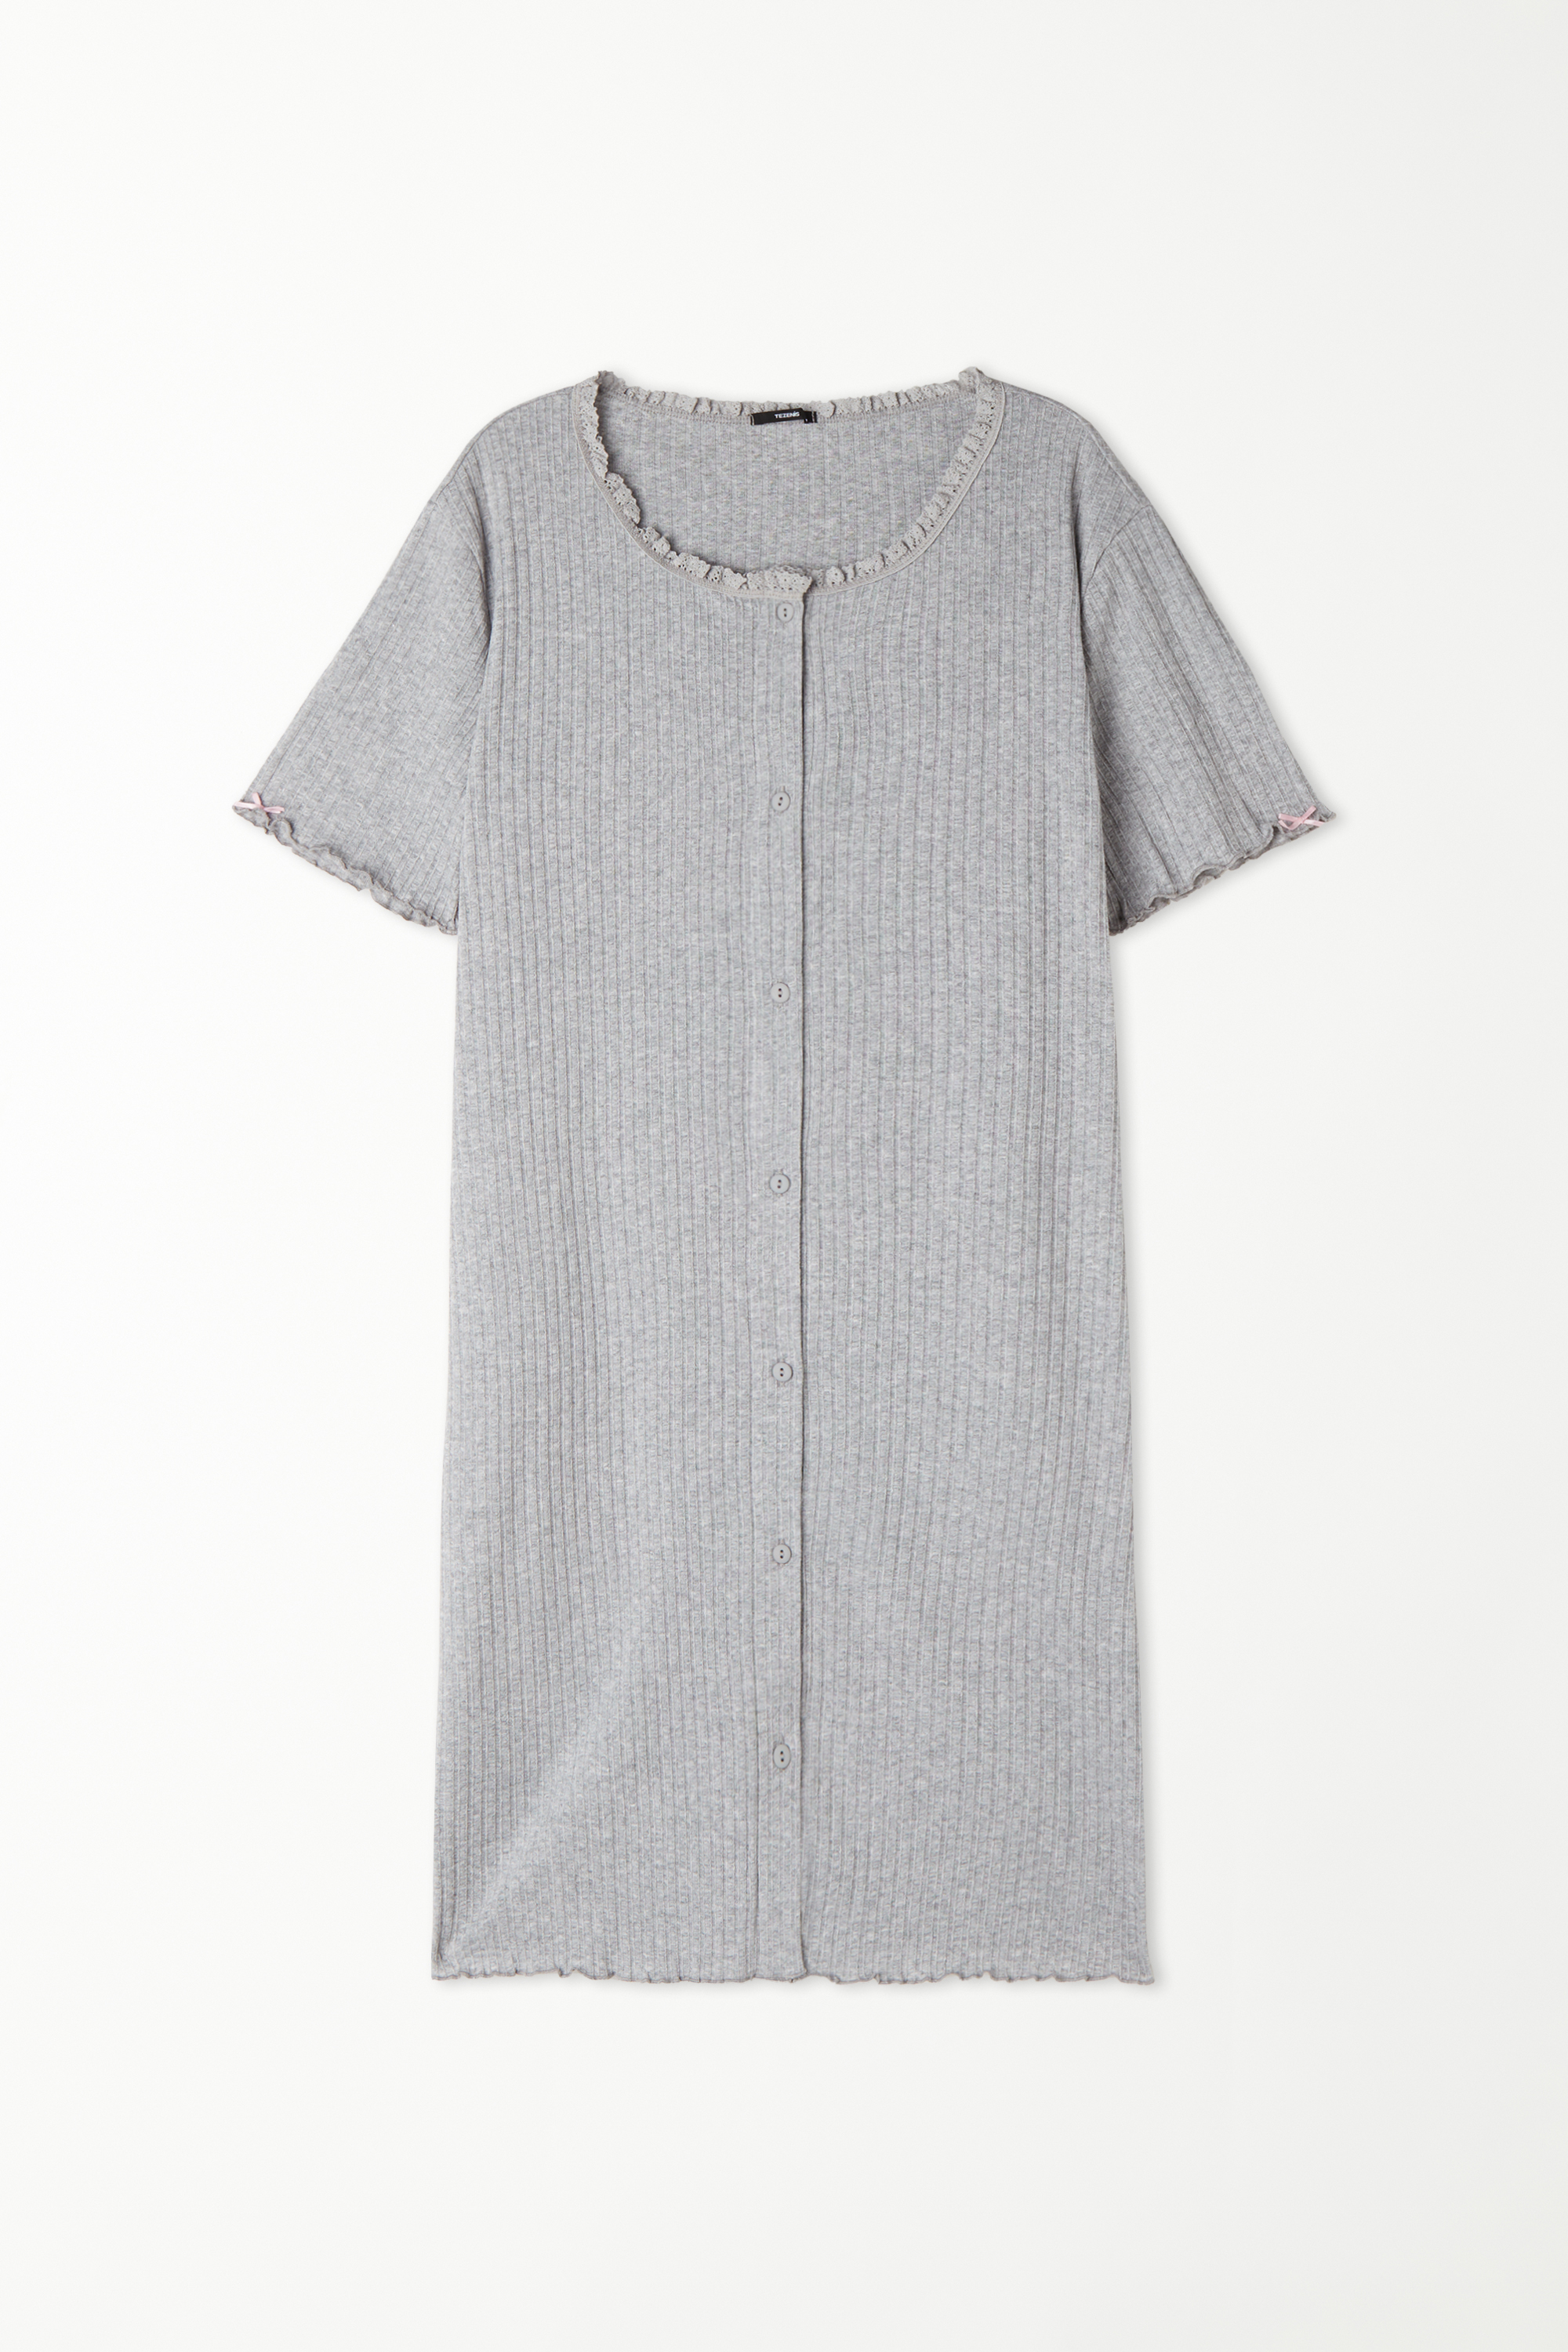 Half Sleeve Button Up Perforated Ribbed Nightgown